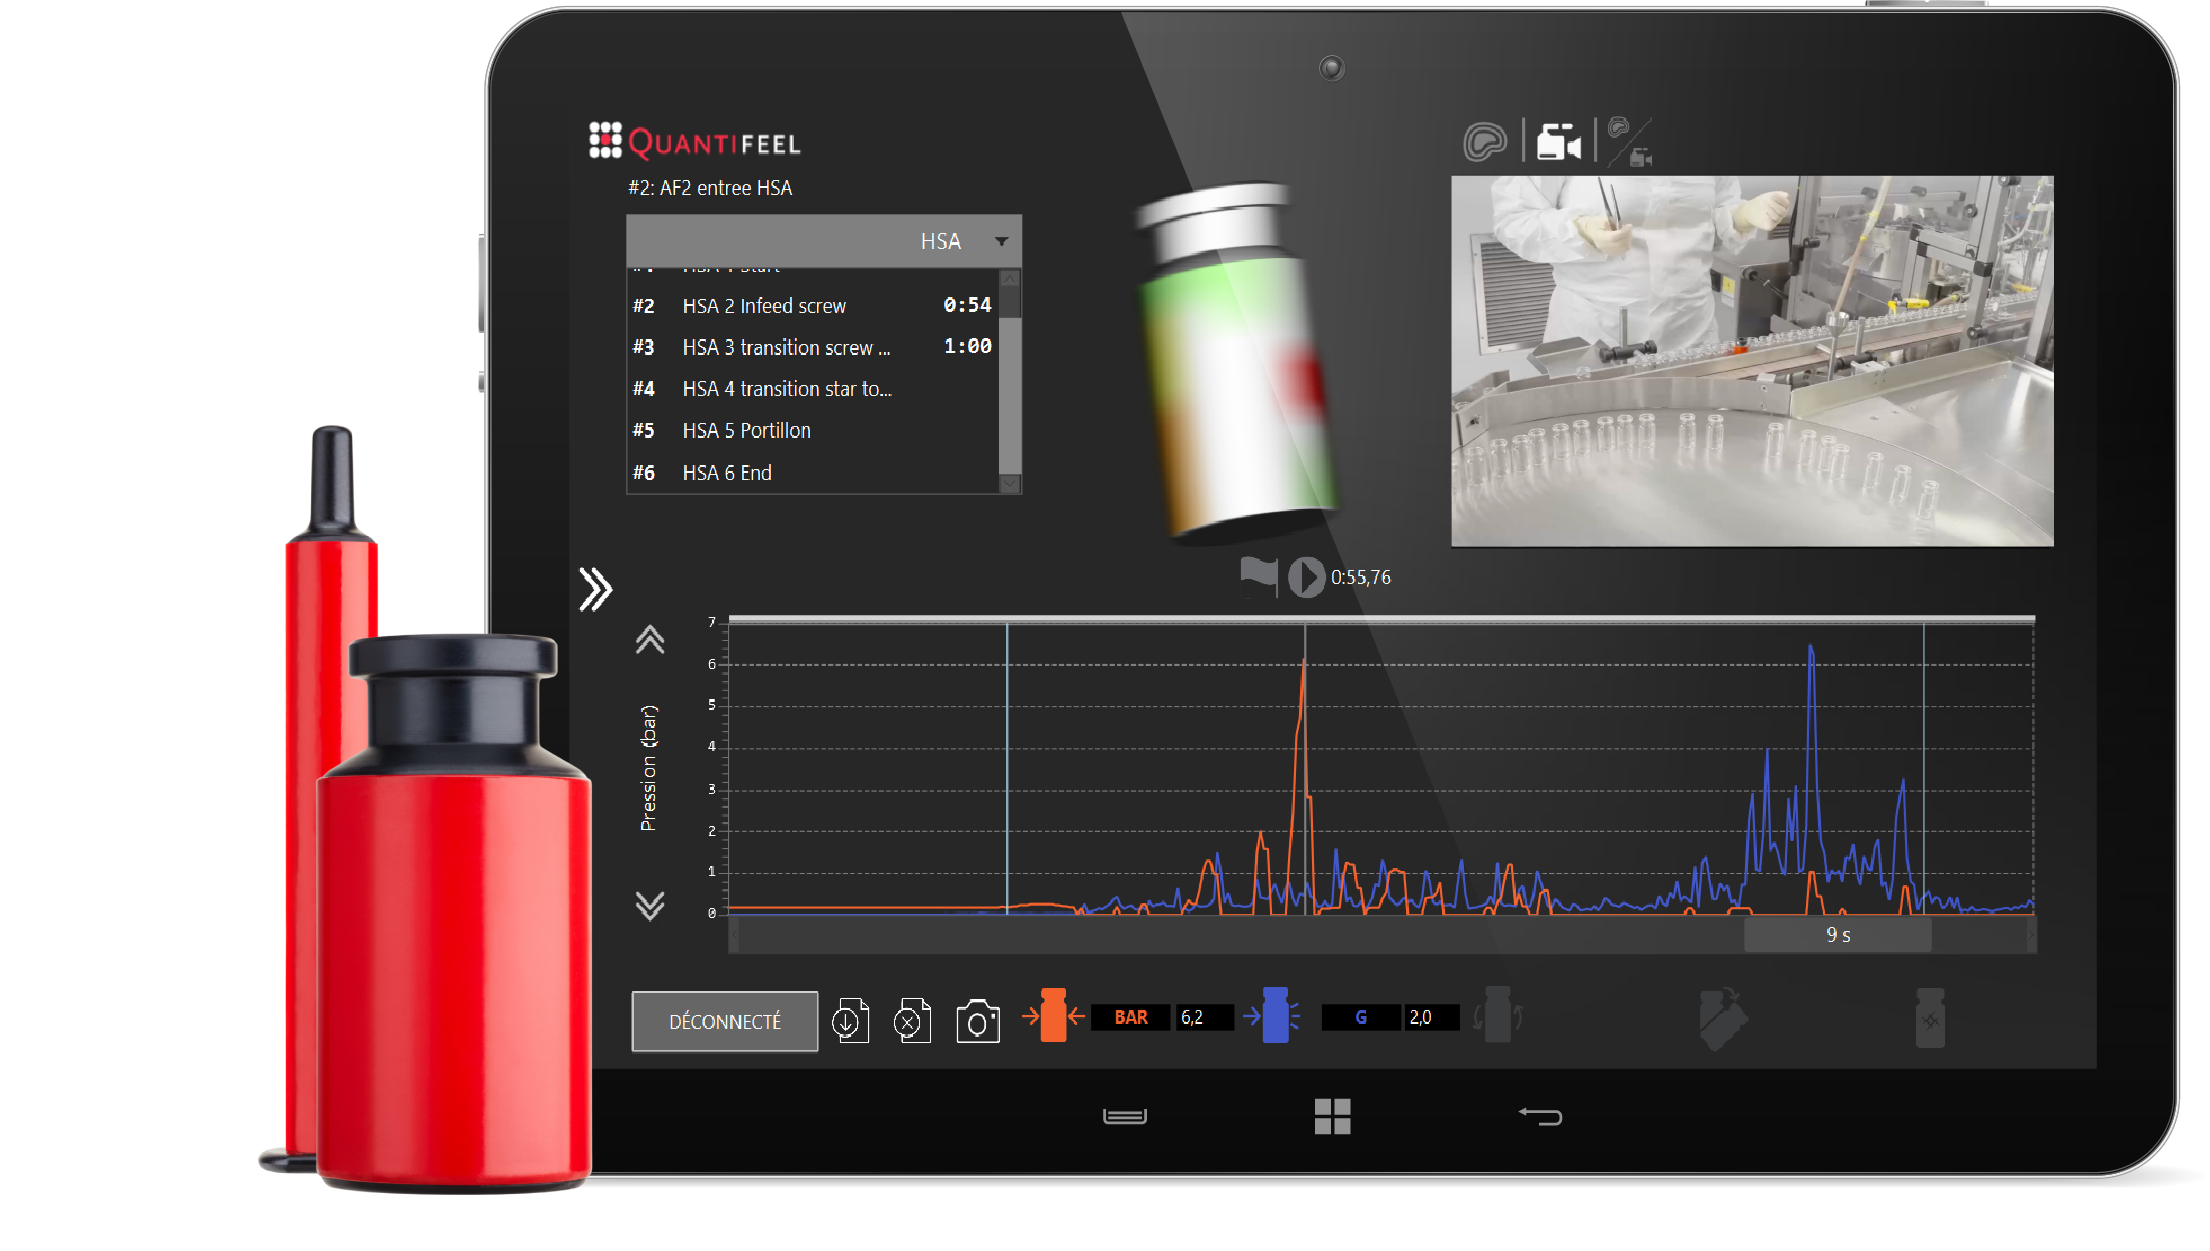 Tablet with Quantifeel Analyzer software showing container damage on a vial with video recording in top right and graph along the bottom. A syringe and vial drone stand beside the screen.